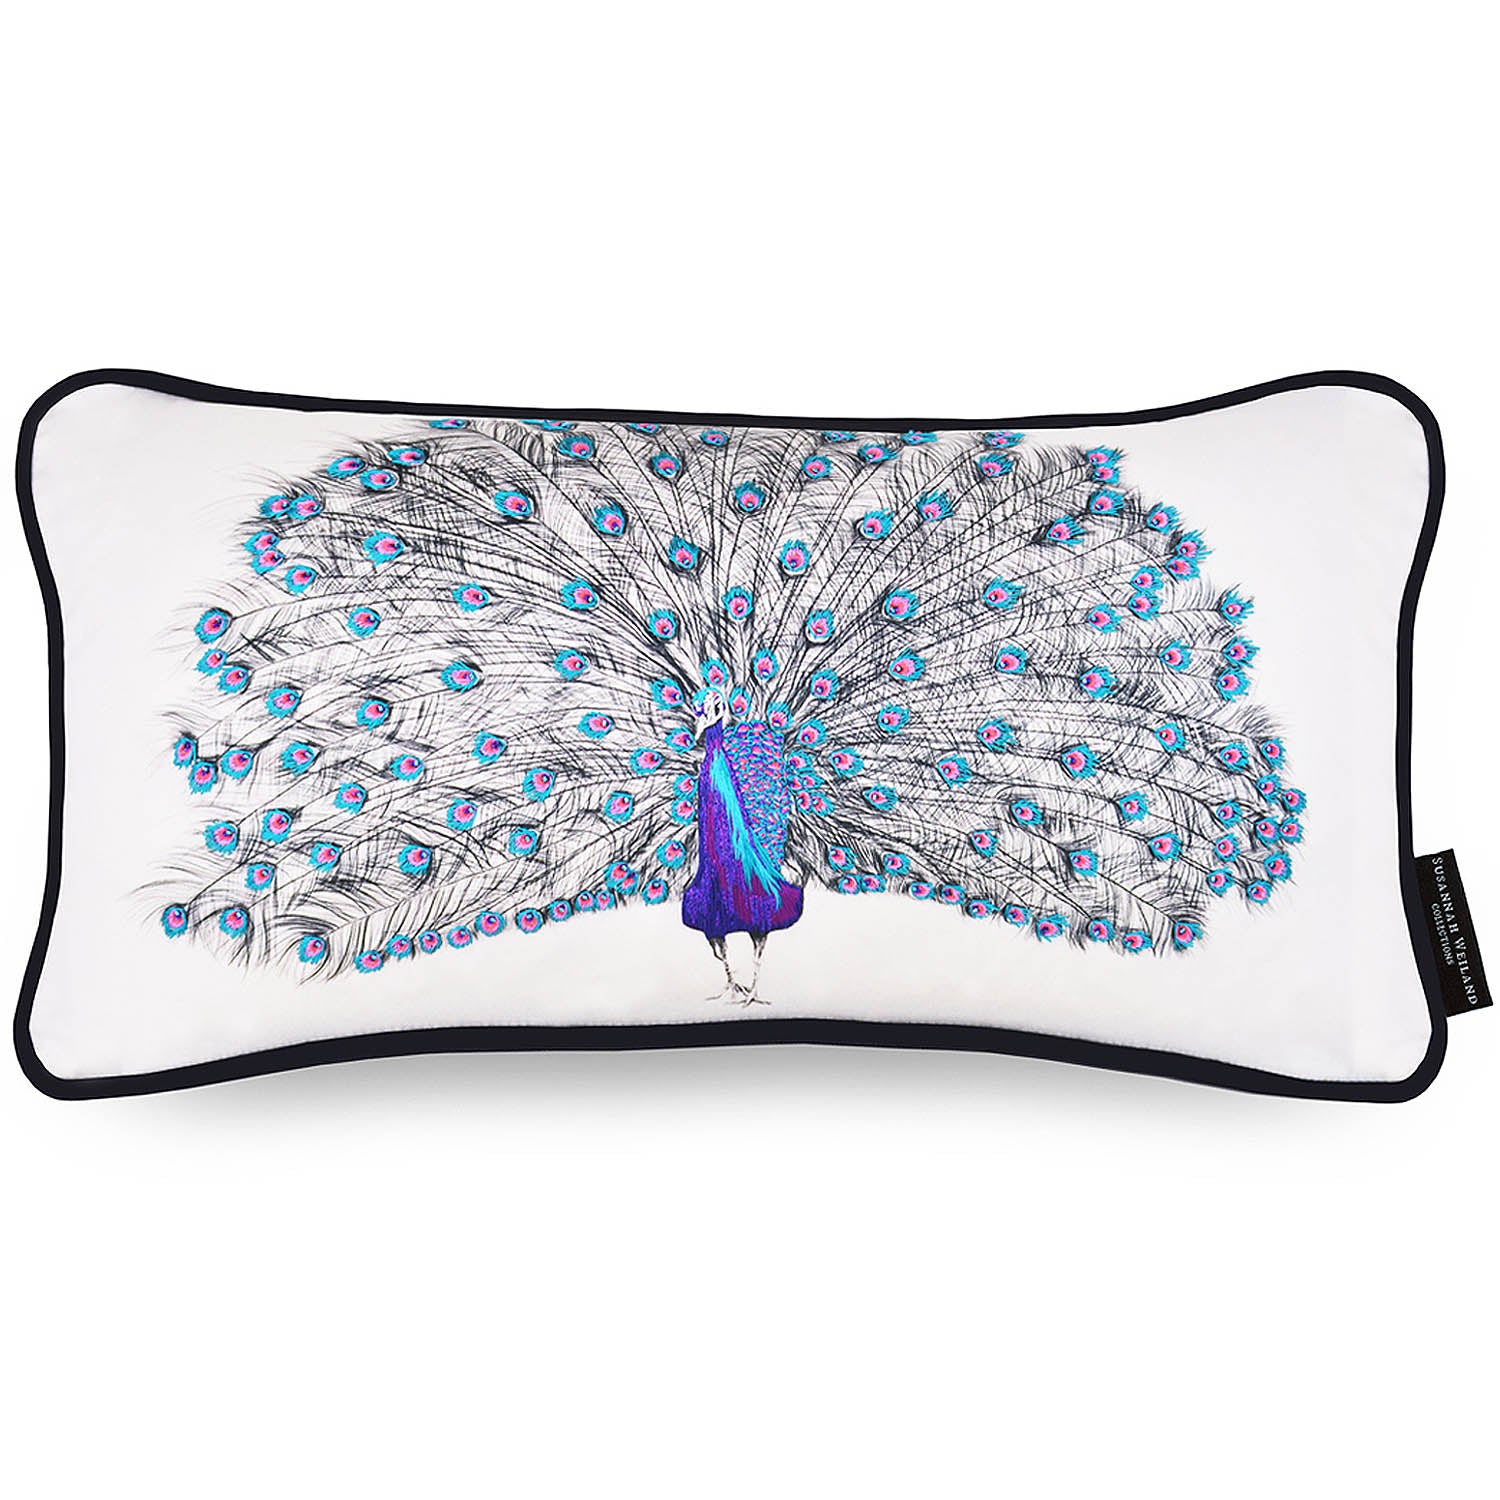 Peacock cushion with blue and purple hand embroidered detail and seed beads